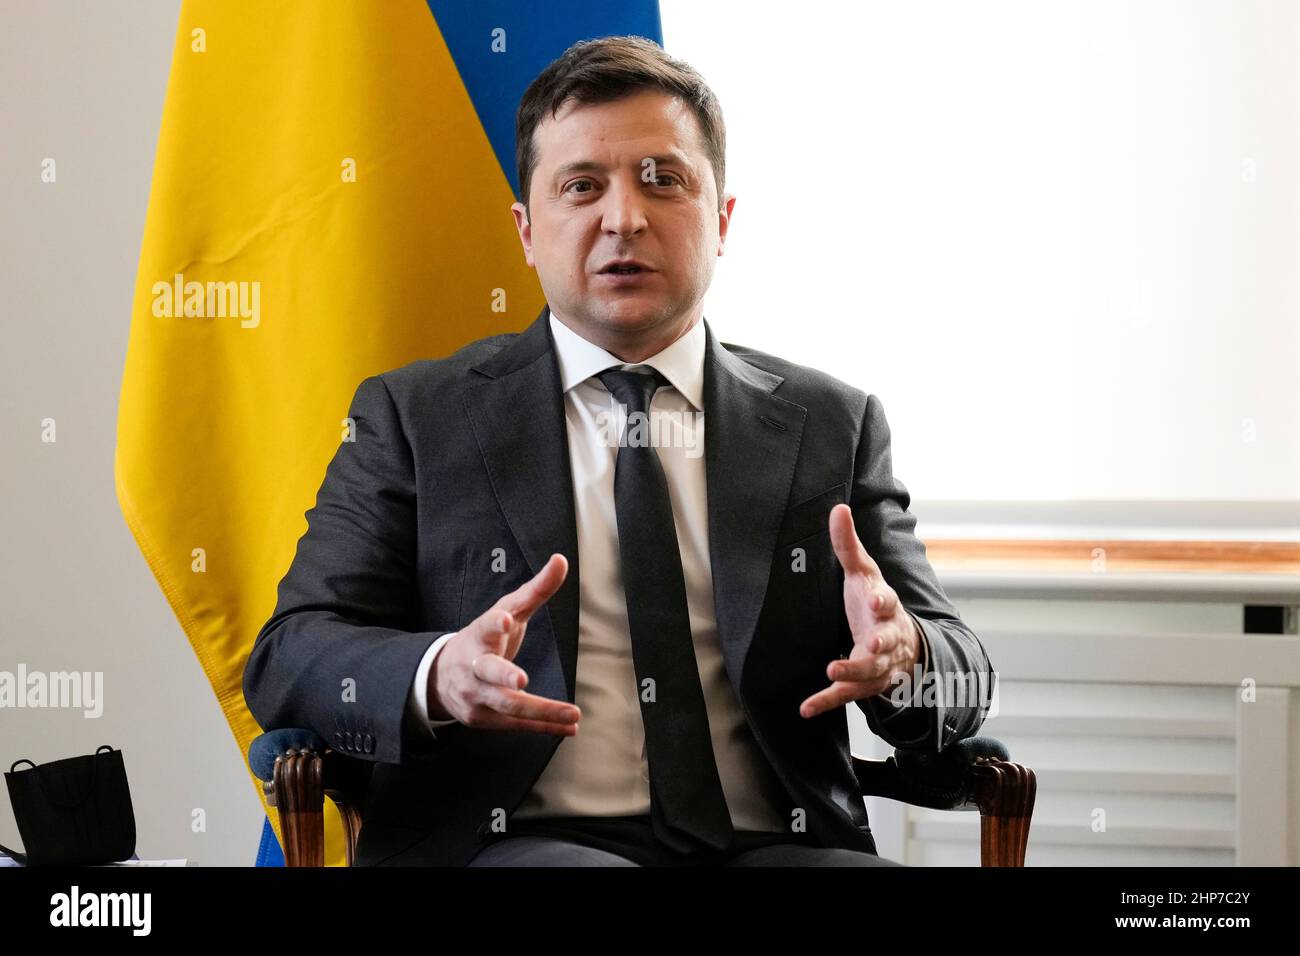 Ukrainian President Volodymyr Zelenskyy attends a meeting with Prime Minister Boris Johnson at the Munich Security Conference in Germany where the Prime Minister is meeting with world leaders to discuss tensions in eastern Europe. Picture date: Saturday February 19, 2022. Stock Photo